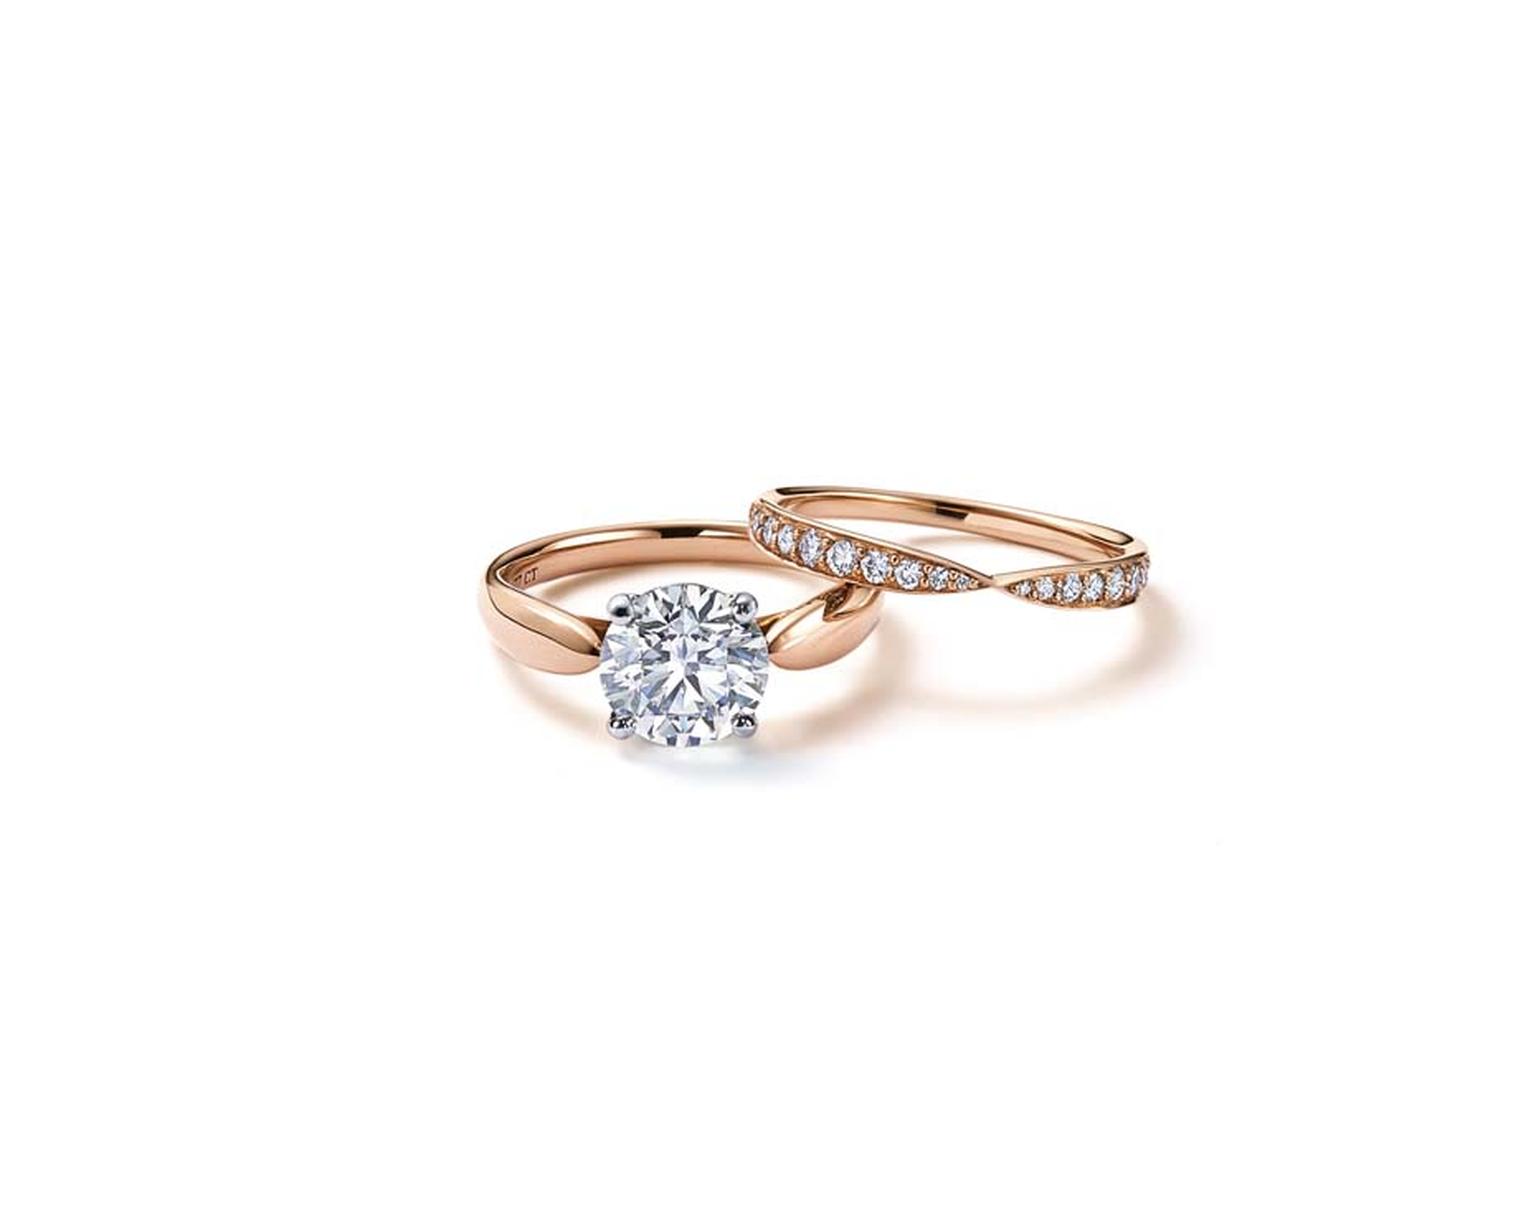 Tiffany Harmony™ solitaire diamond engagement ring in rose gold, with a matching rose gold wedding band with diamonds.